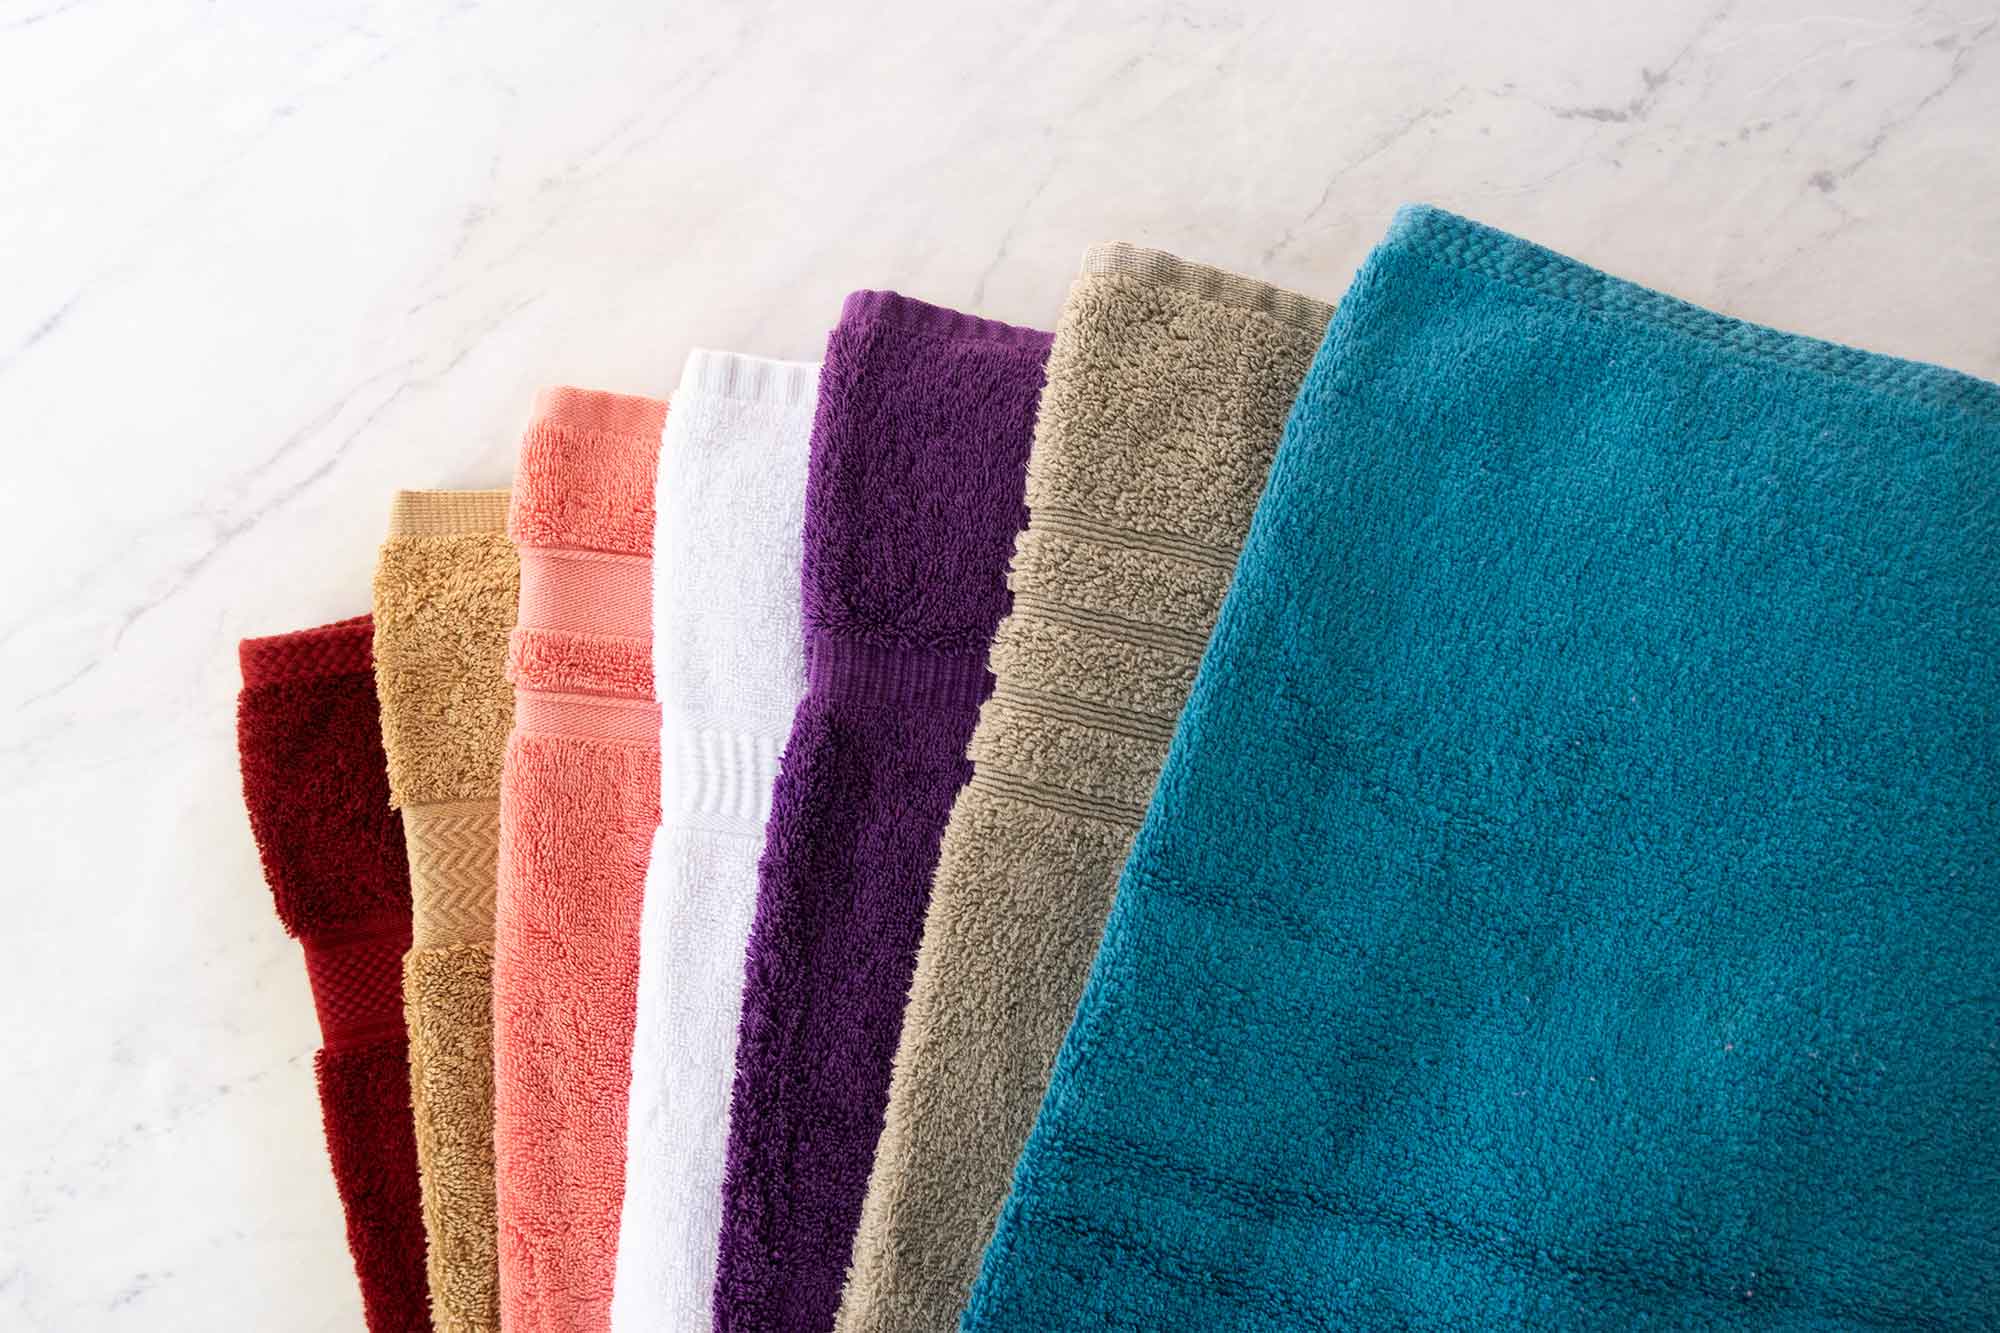 https://www.yourbestdigs.com/wp-content/uploads/2018/08/bath-towels-others-tested.jpg